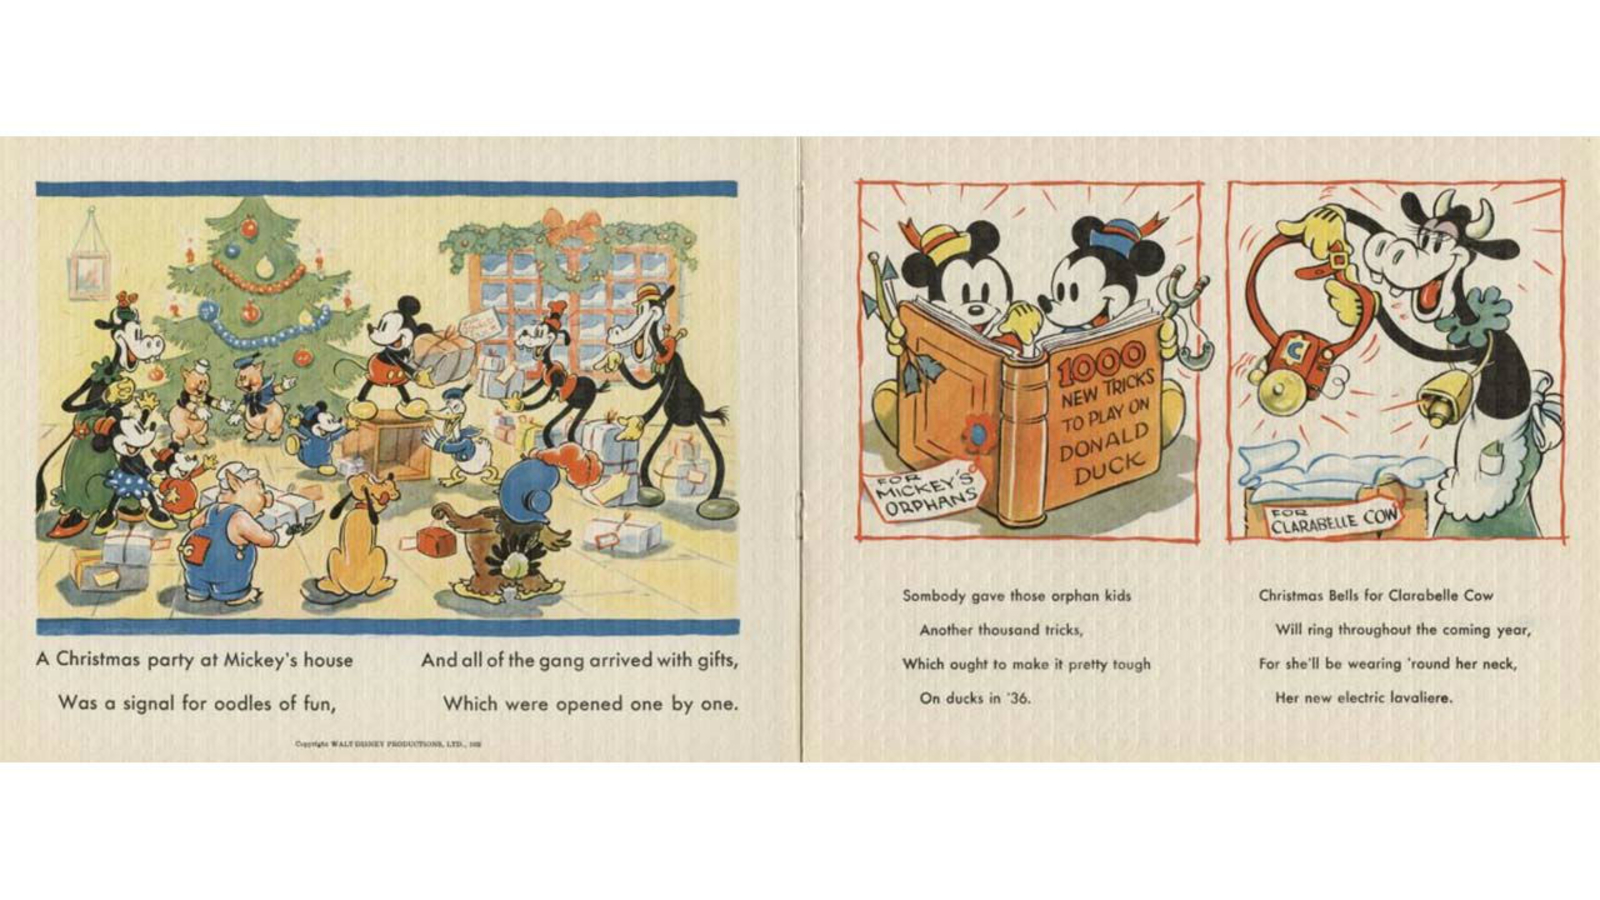 PHOTOS: Go back in time with vintage Disney Christmas cards